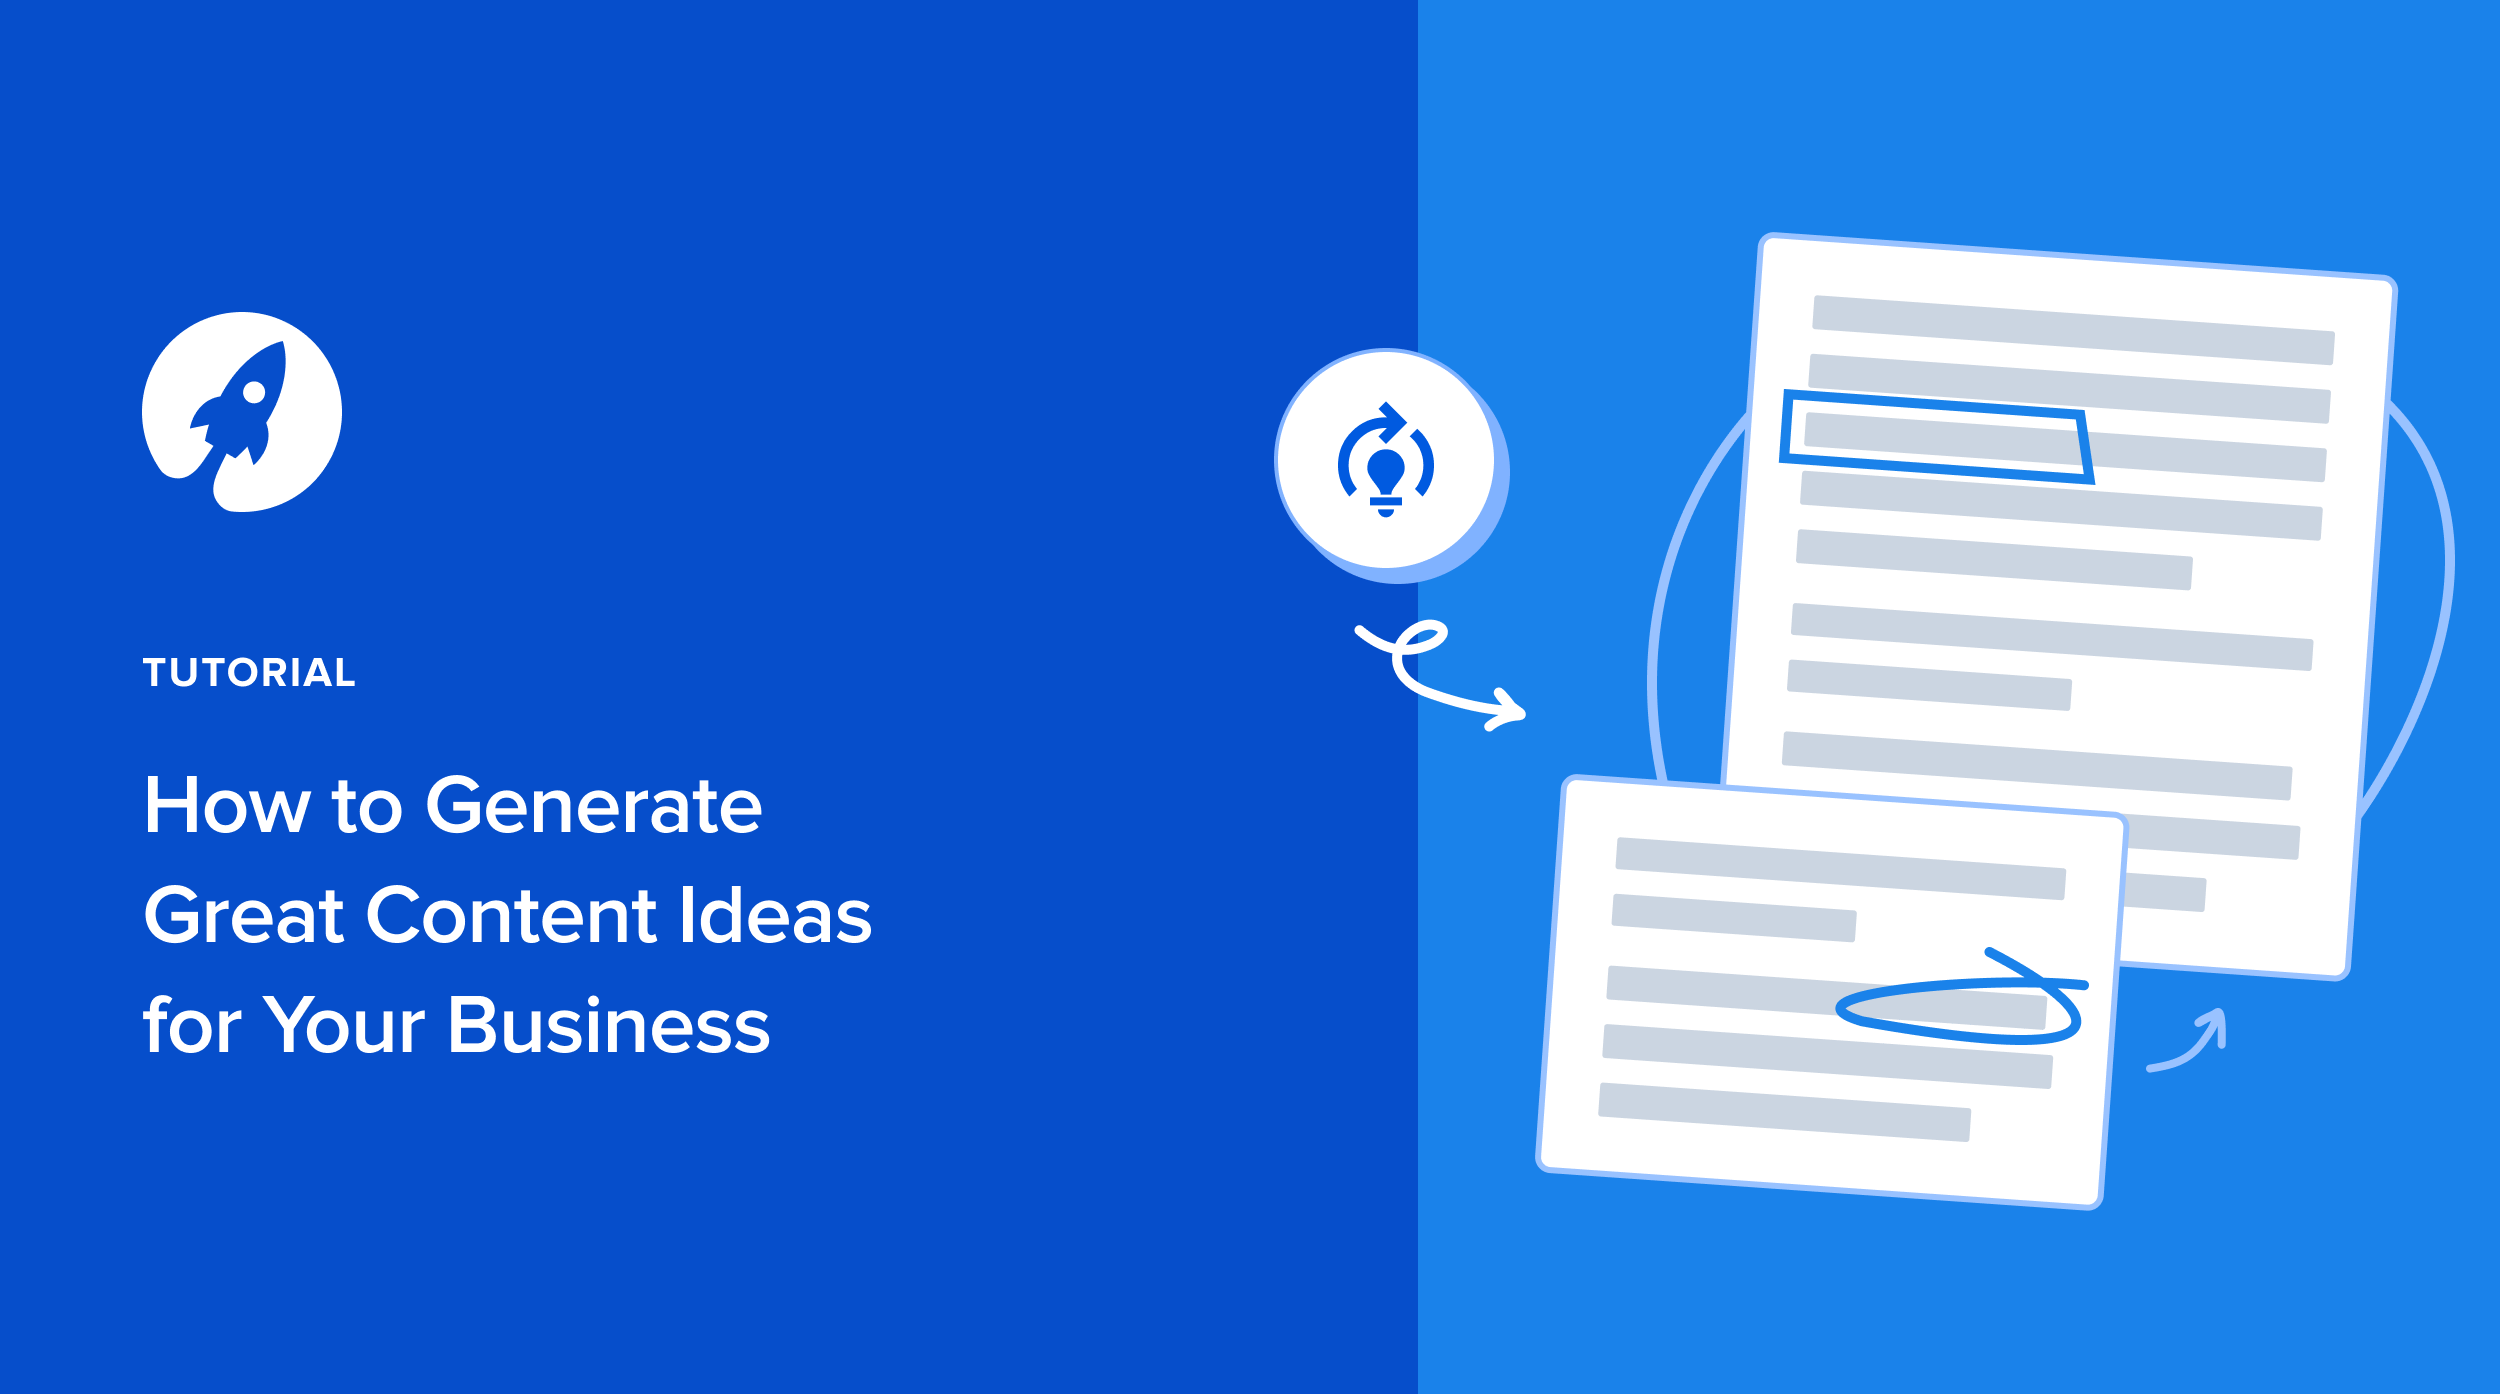 How to Generate Great Content Ideas for Your Business in 5 Steps